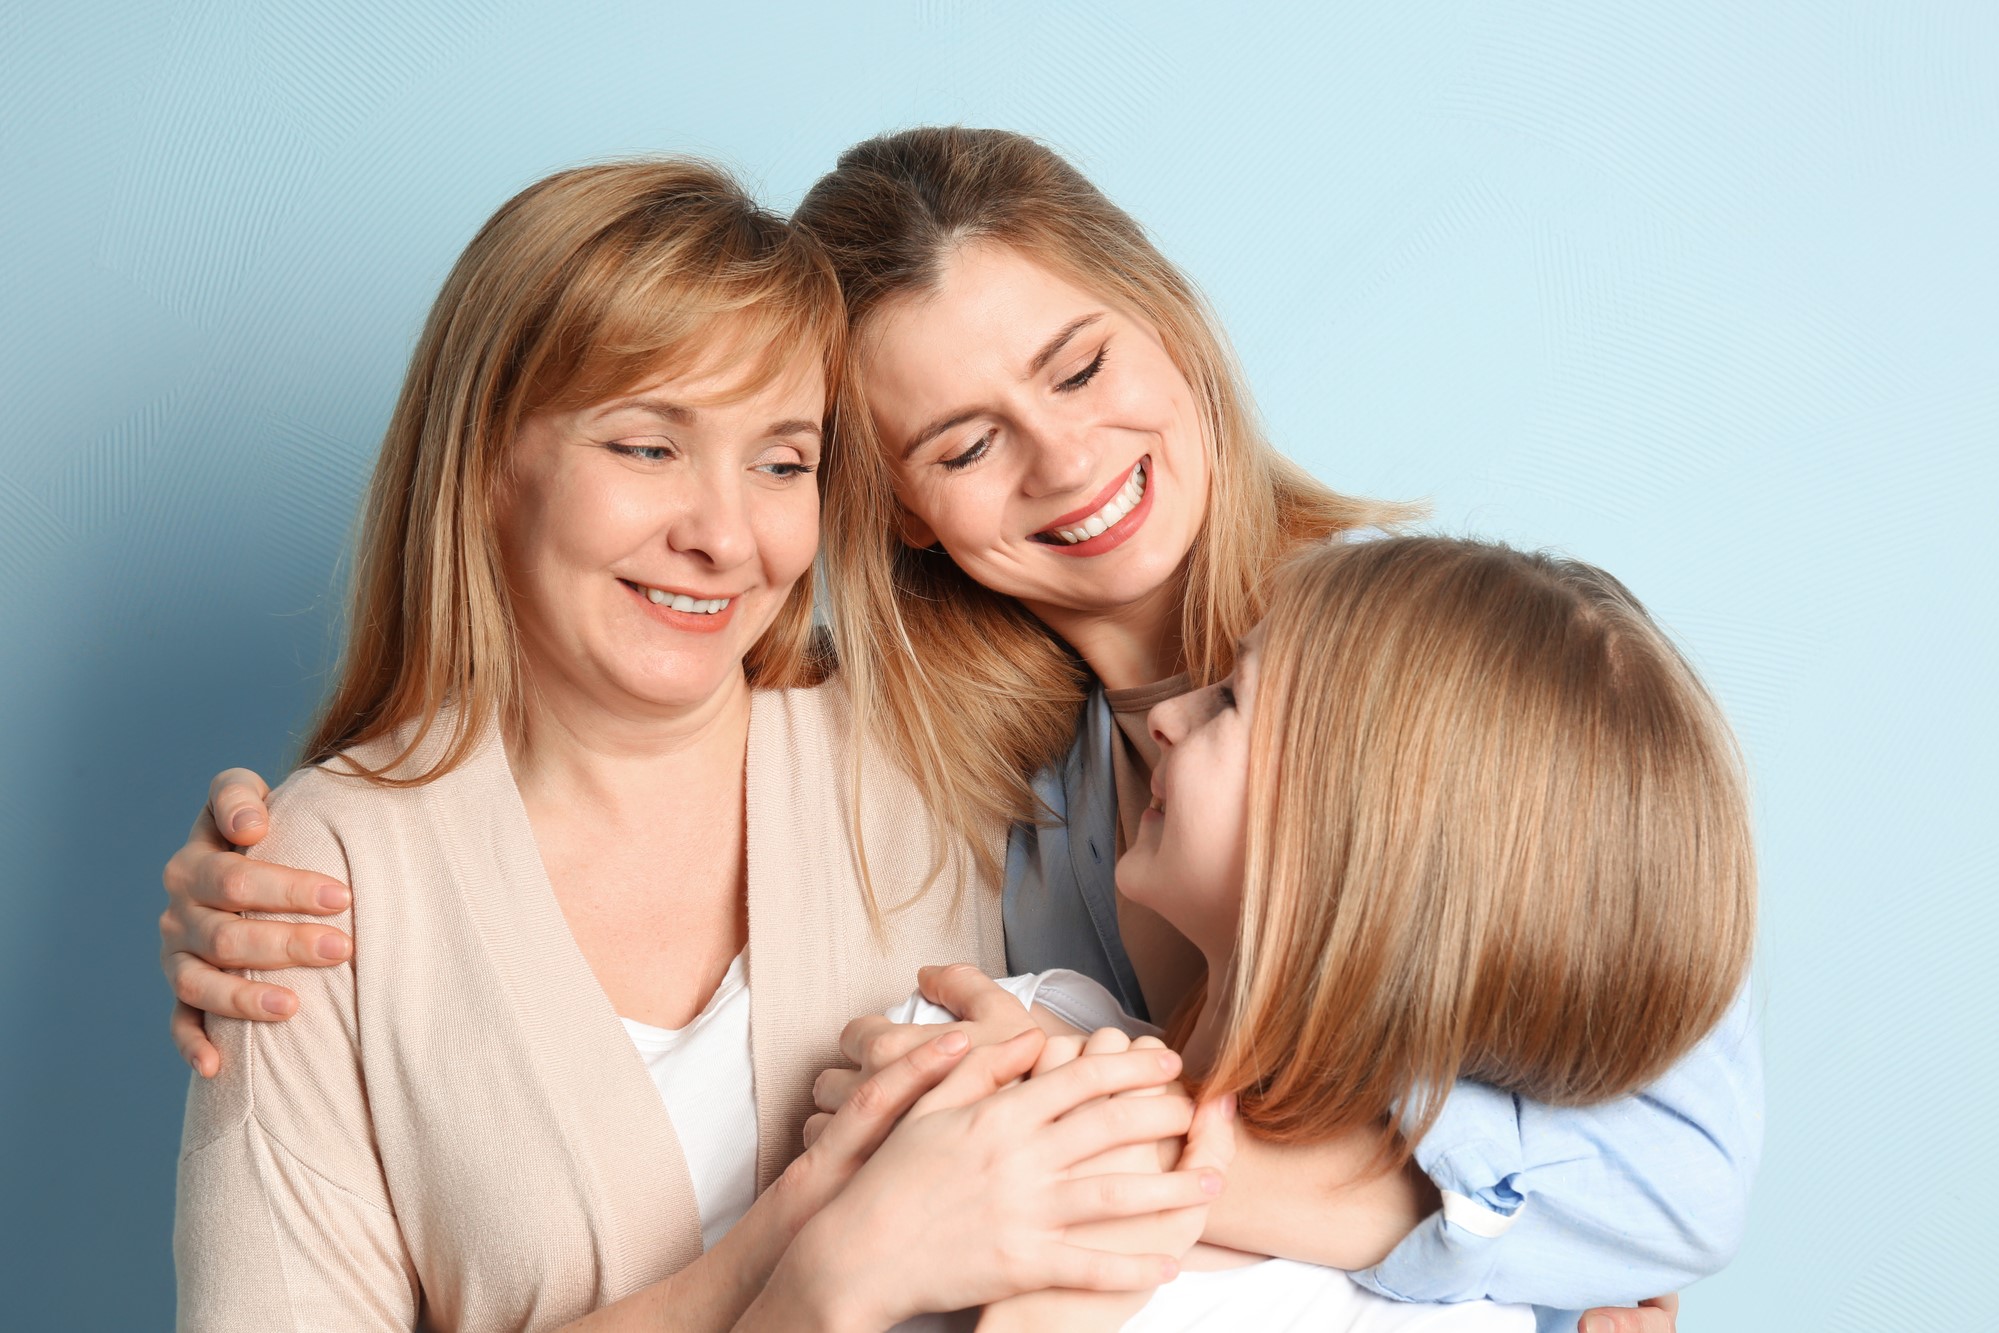 Happy young woman with her mother and daughter on color background